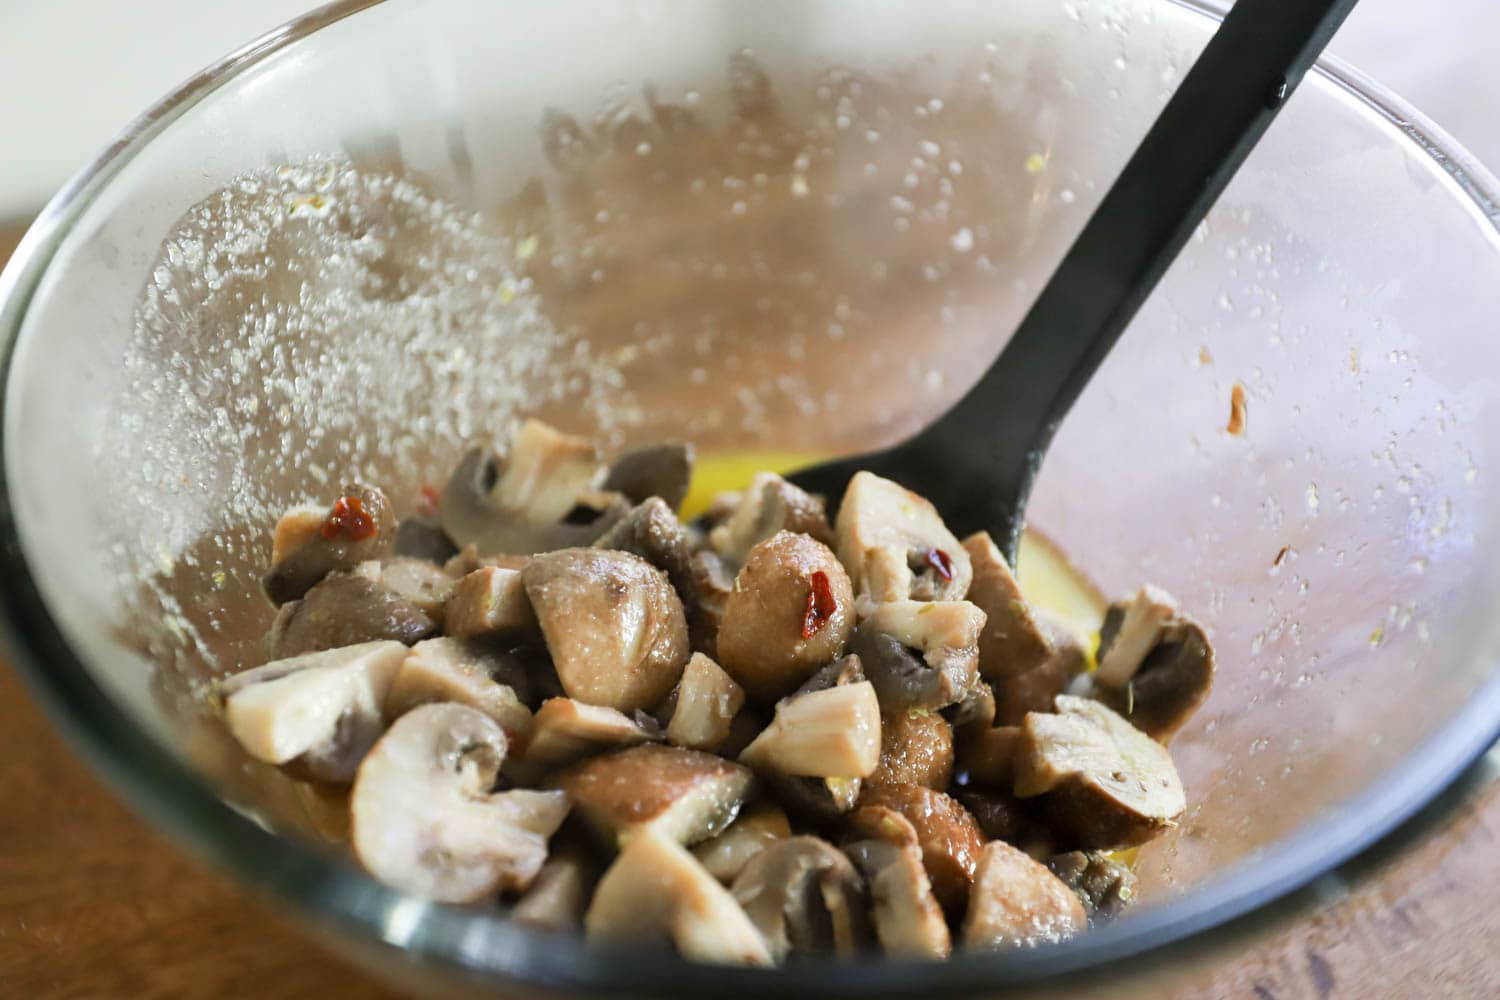 mushrooms stirred into marinade with black plastic spoon in glass bowl.